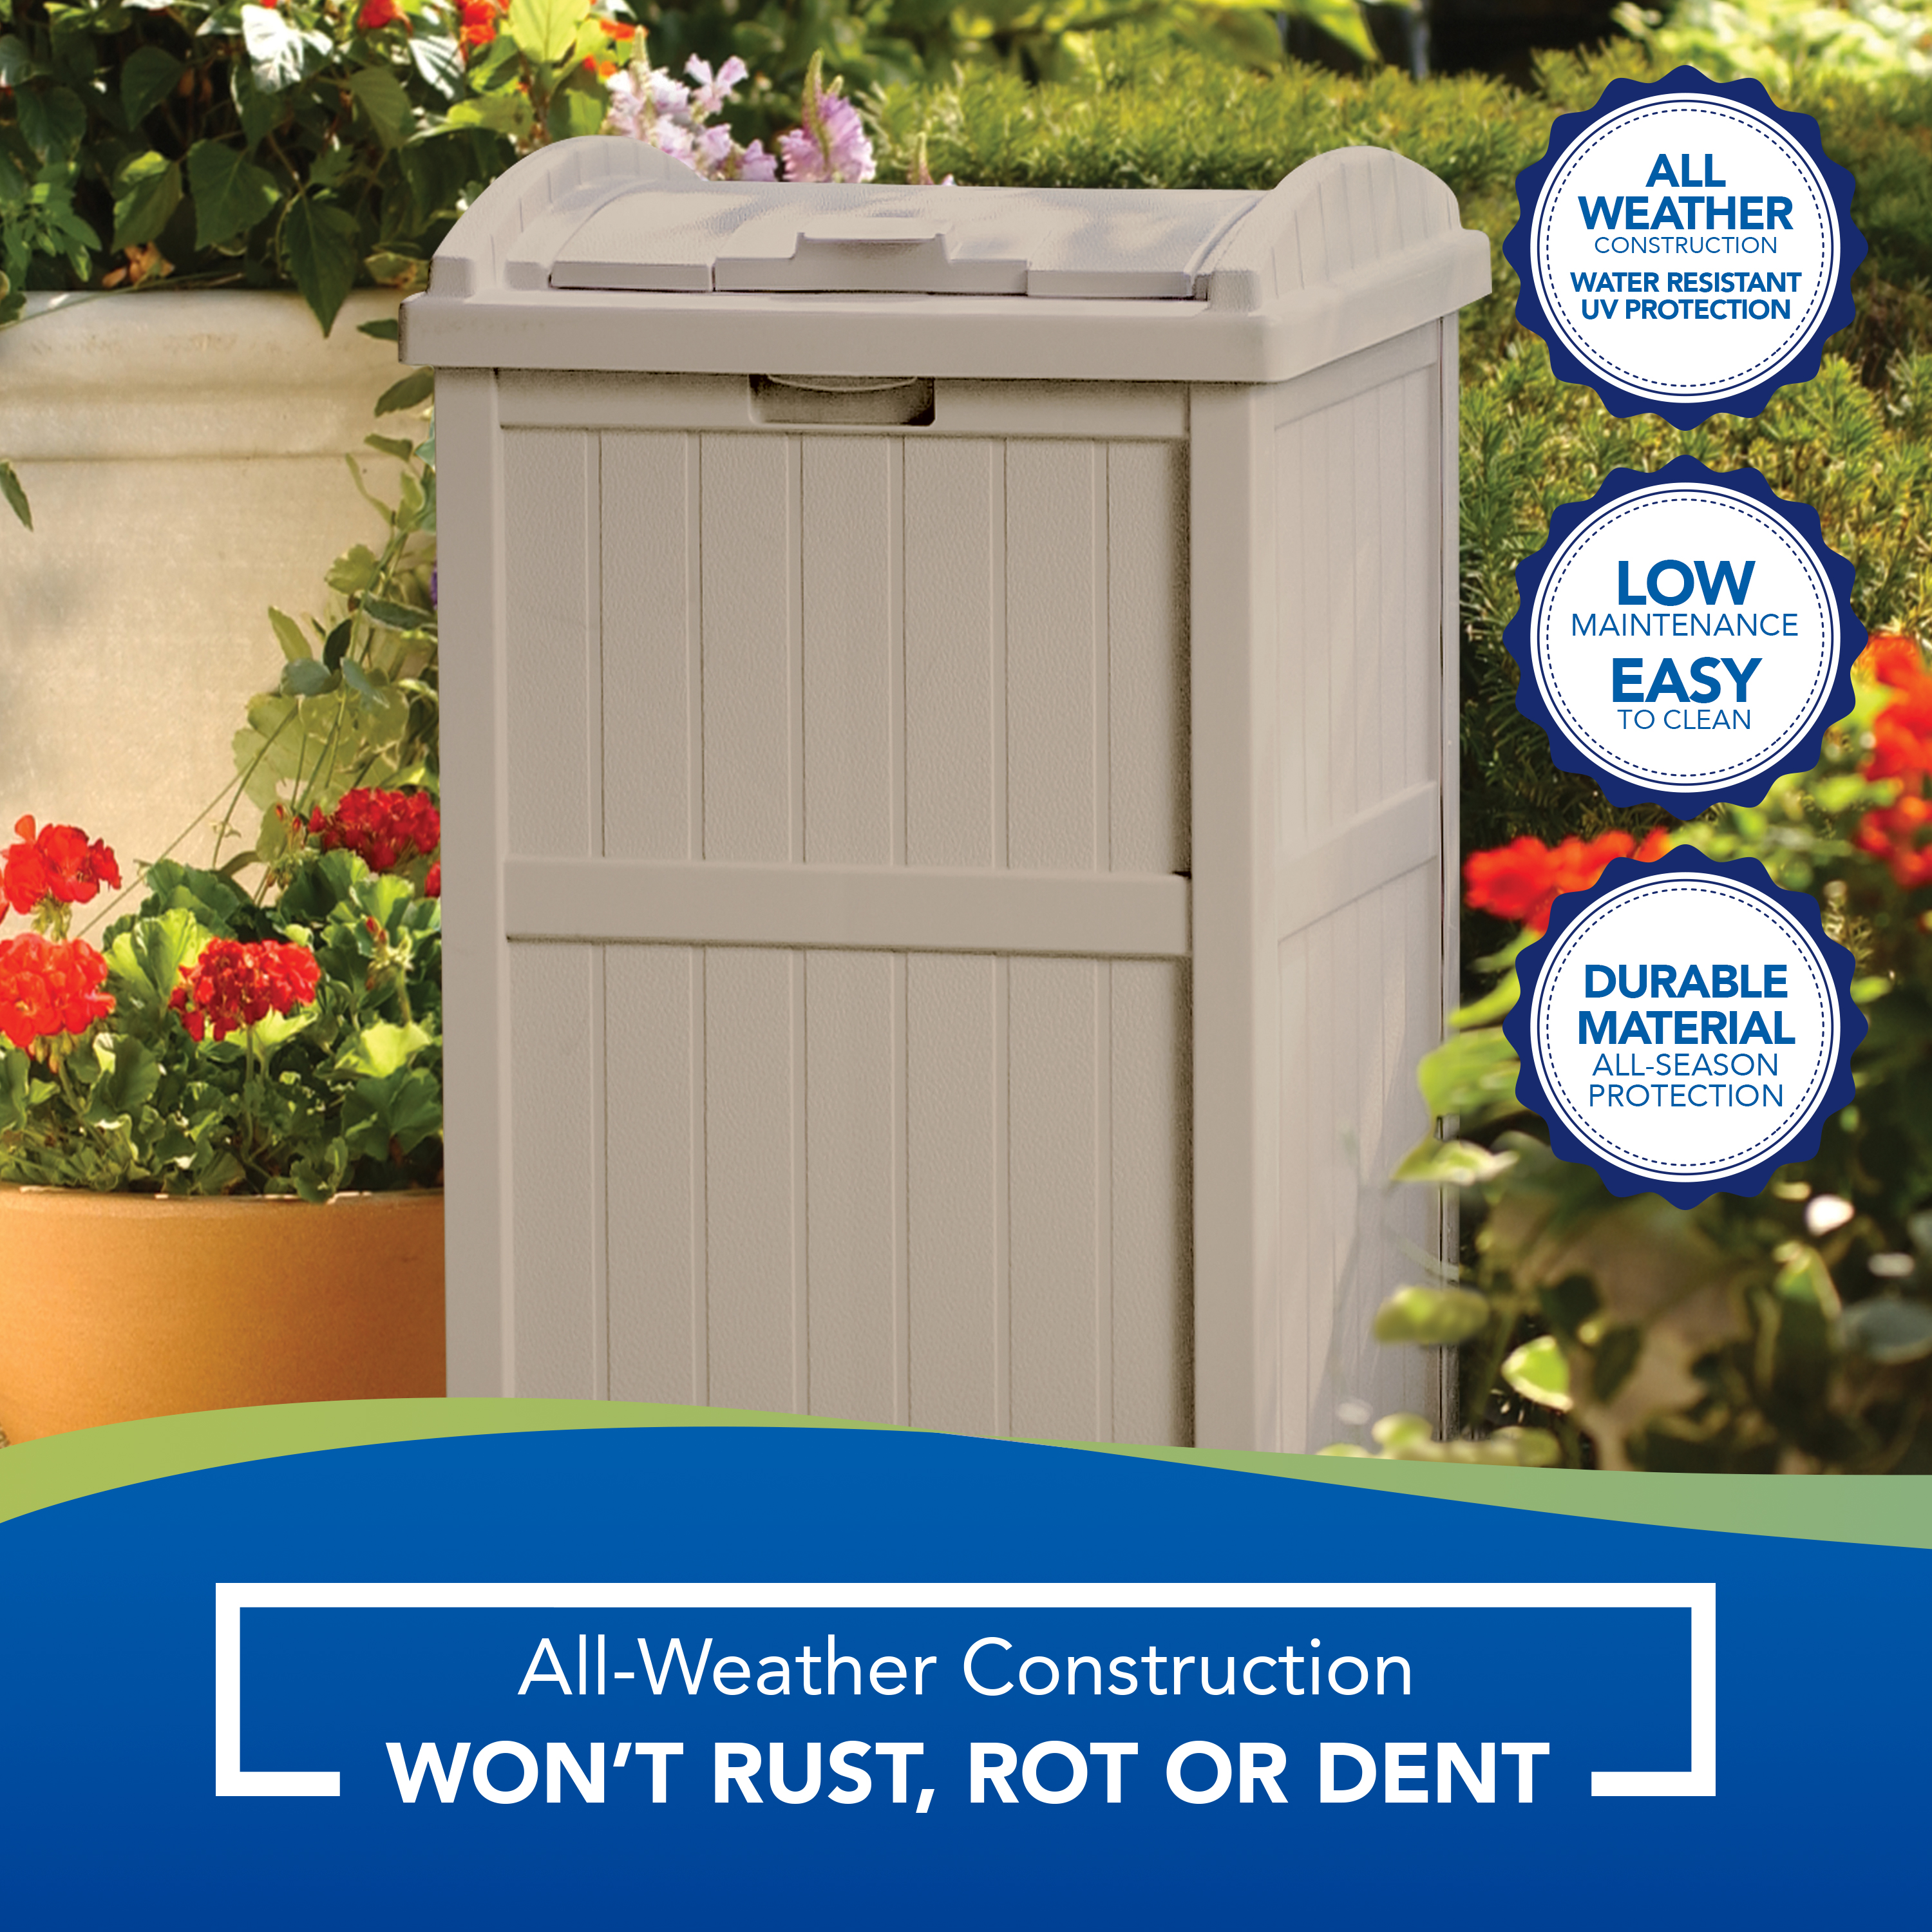 Suncast Outdoor Hideaway Trash Container for Patio, Taupe, 33 Gallon - image 3 of 3